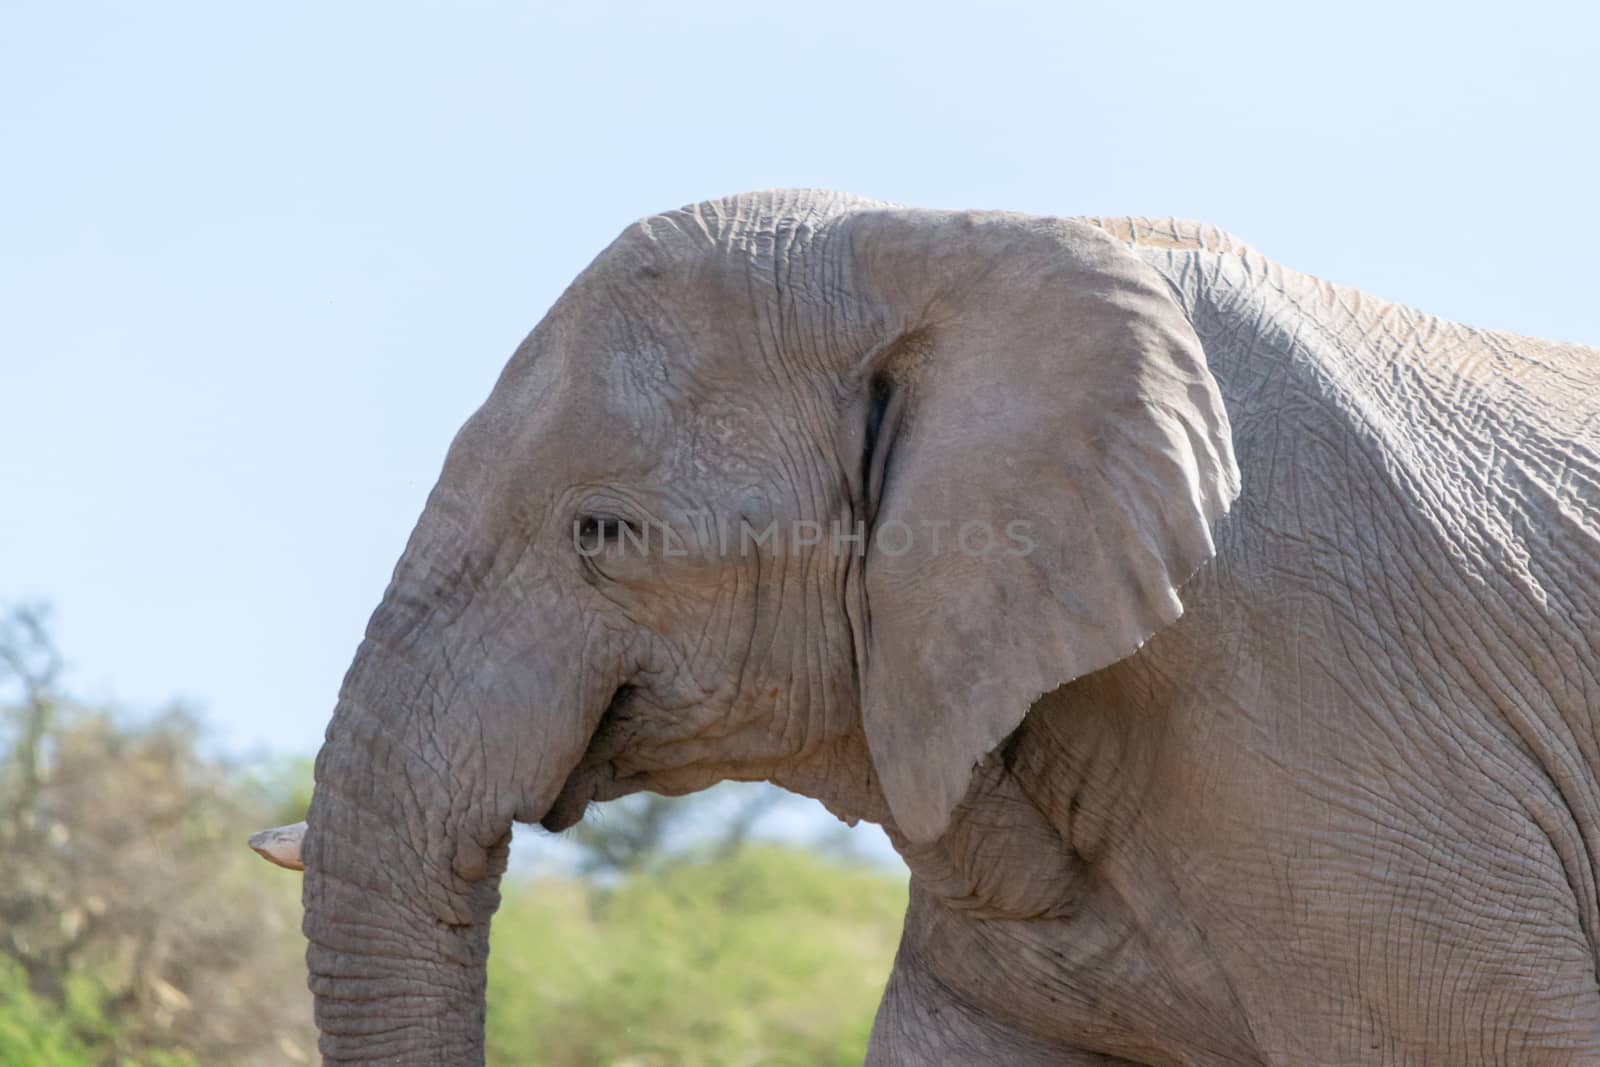 Close-up and detail of smiling elephant head. Animal themes and wildlife